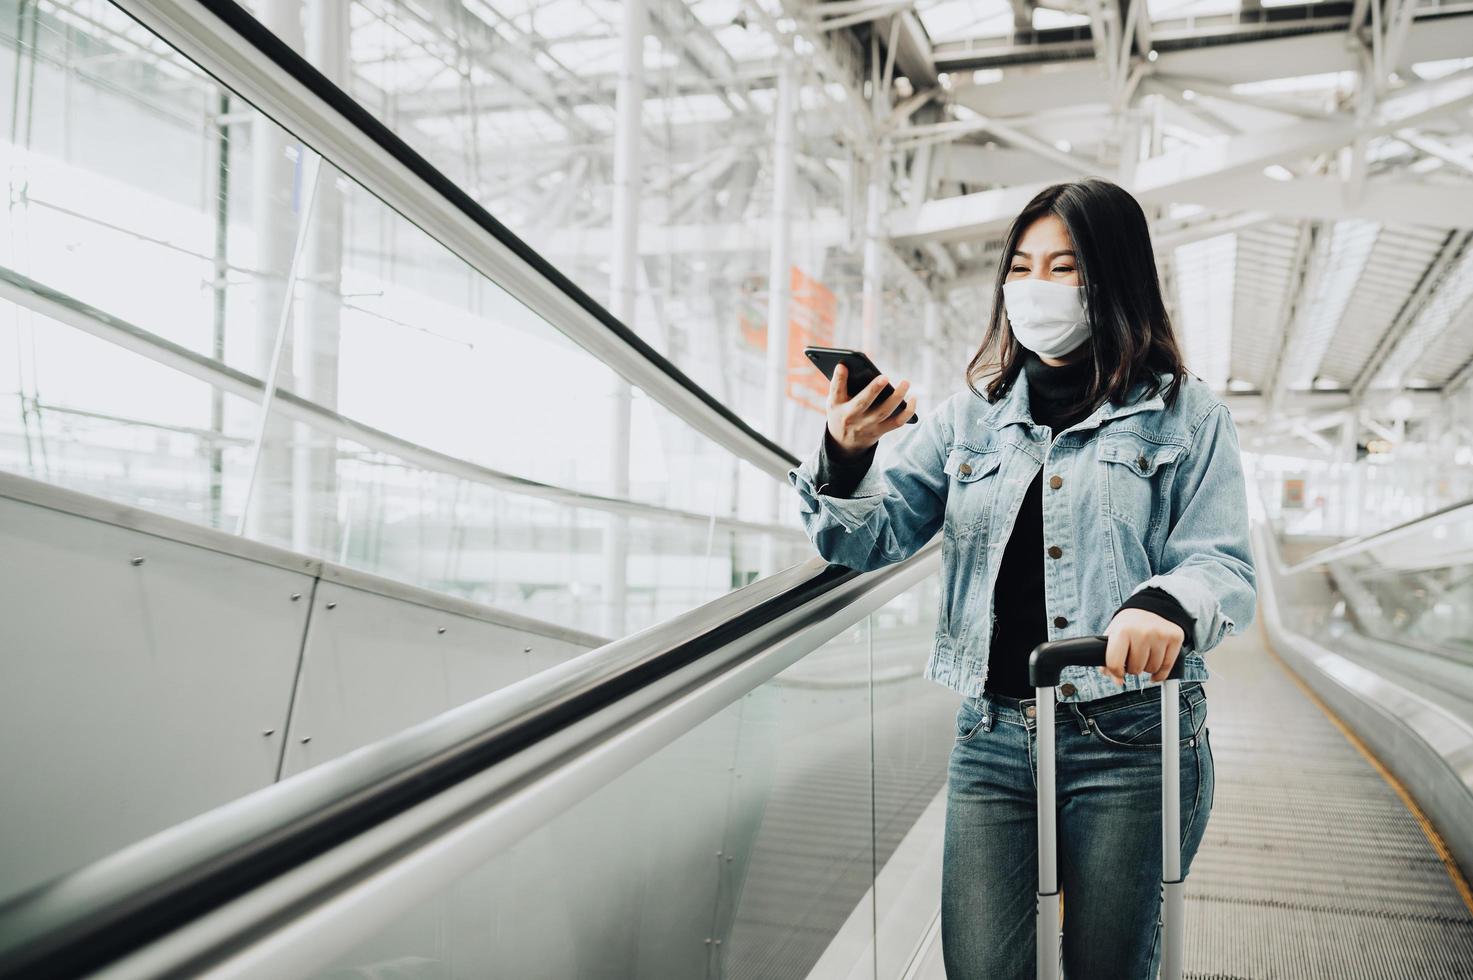 Woman on an escalator wearing a mask and holding a phone photo